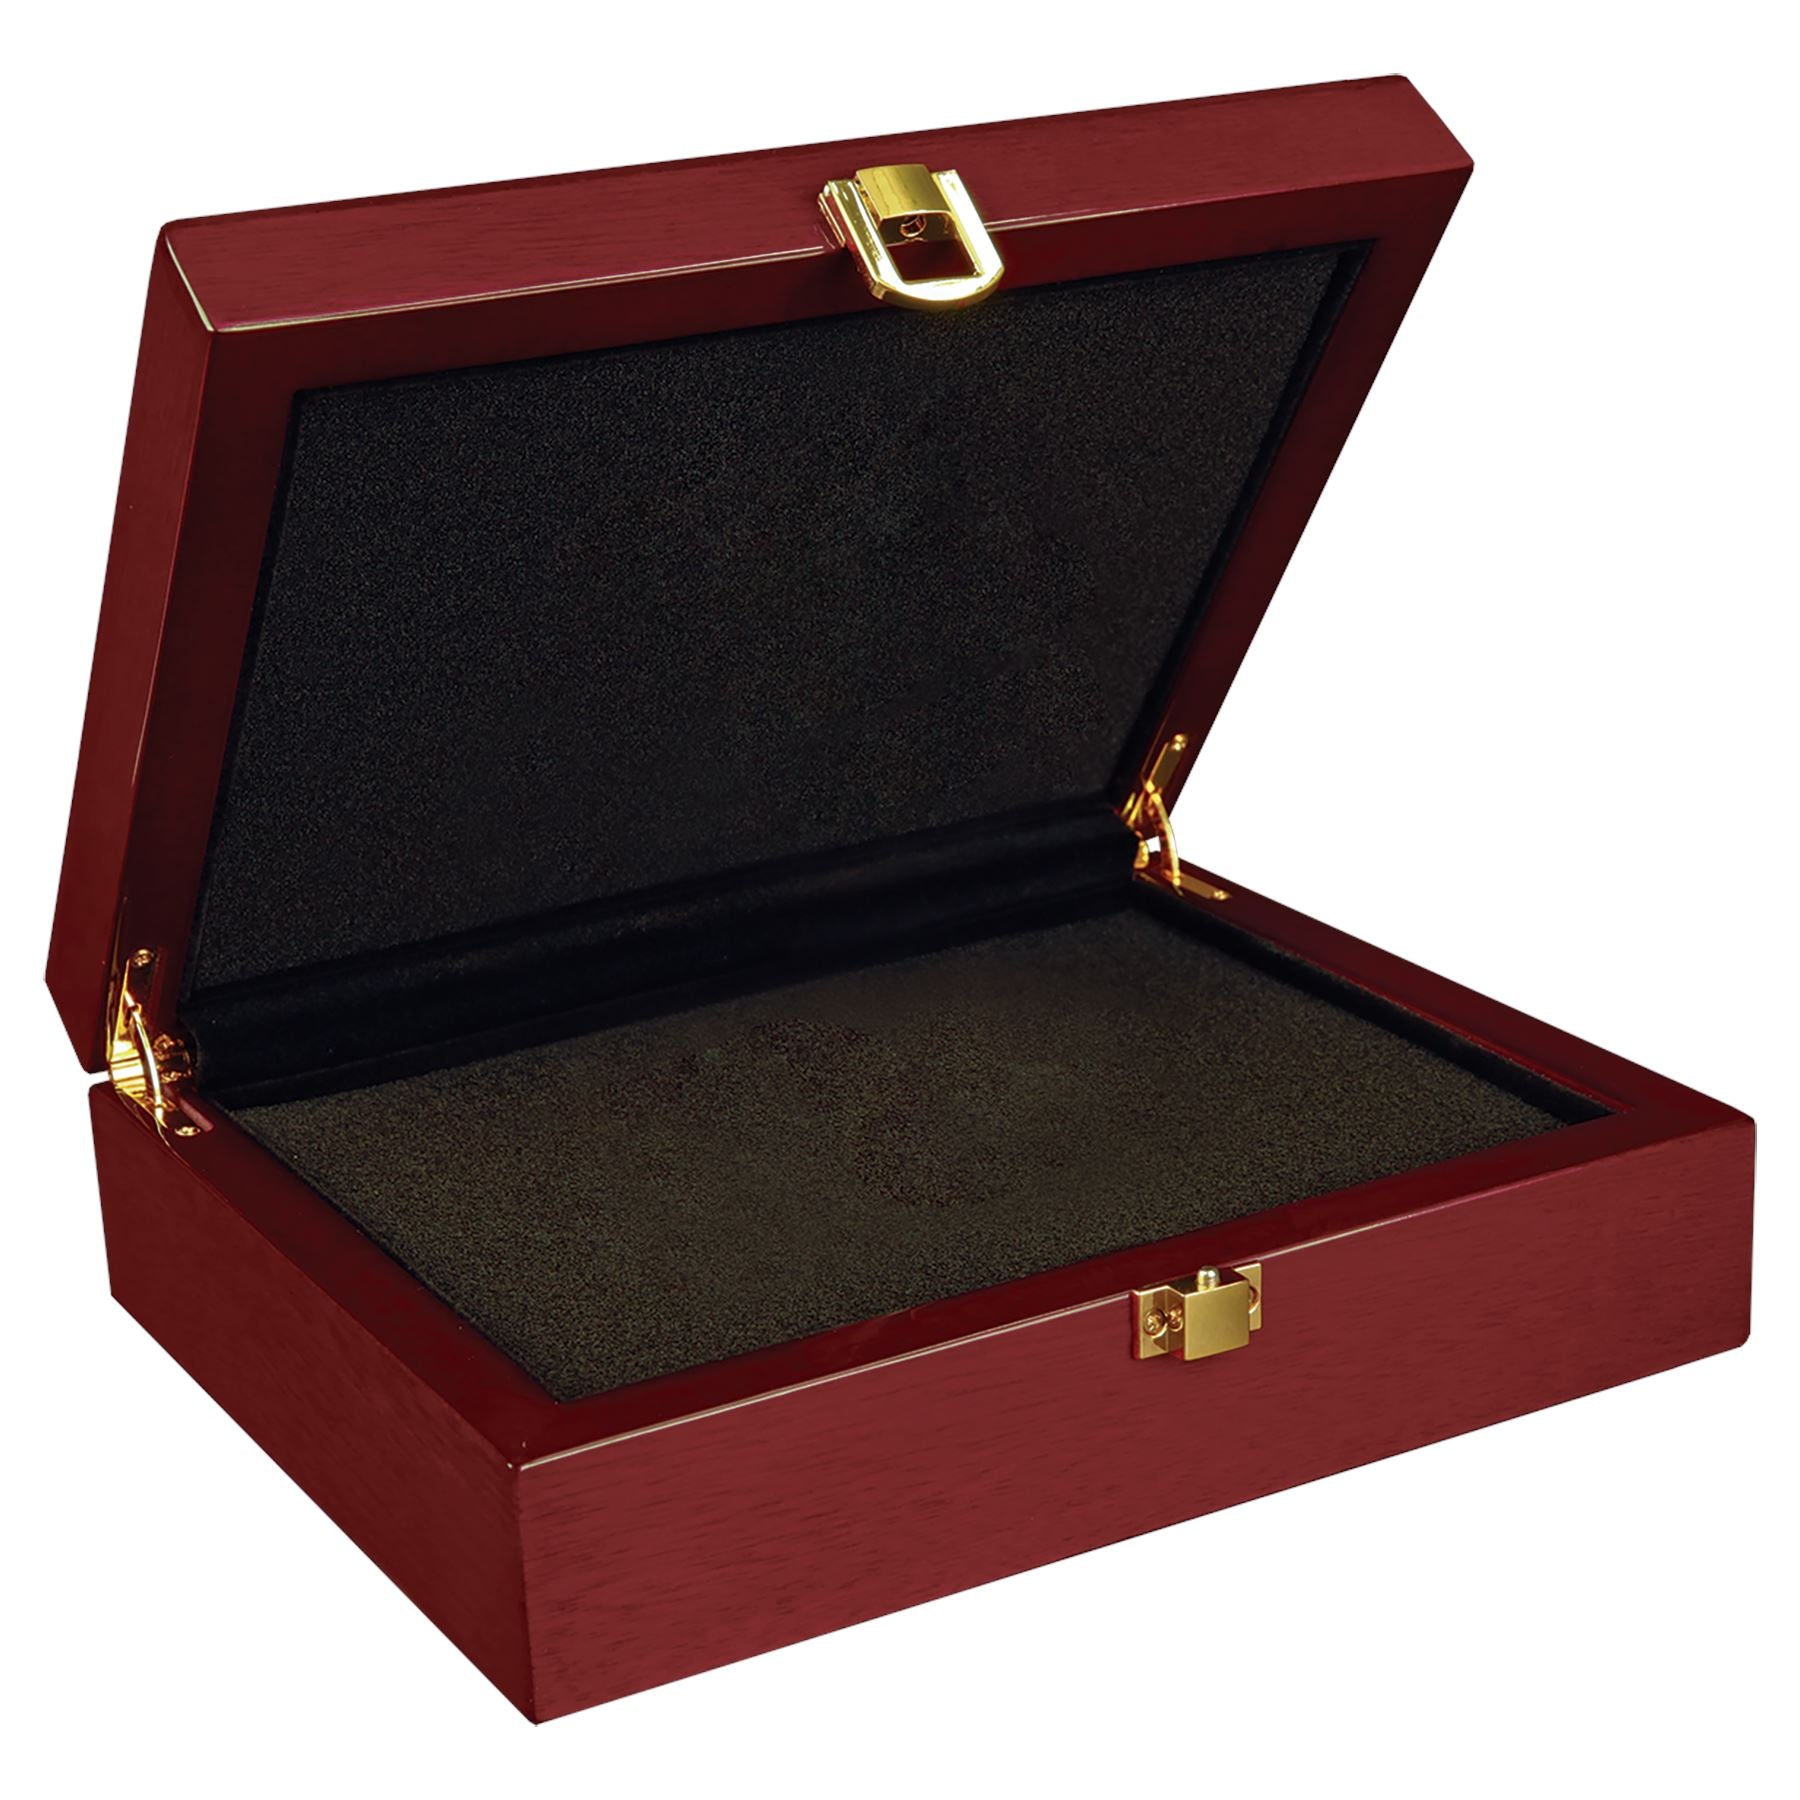 Rosewood Piano Finish Gift Box, 7 3/4" x 6 1/4" x 2 3/8", Laser Engraved Gift Box Craftworks NW 